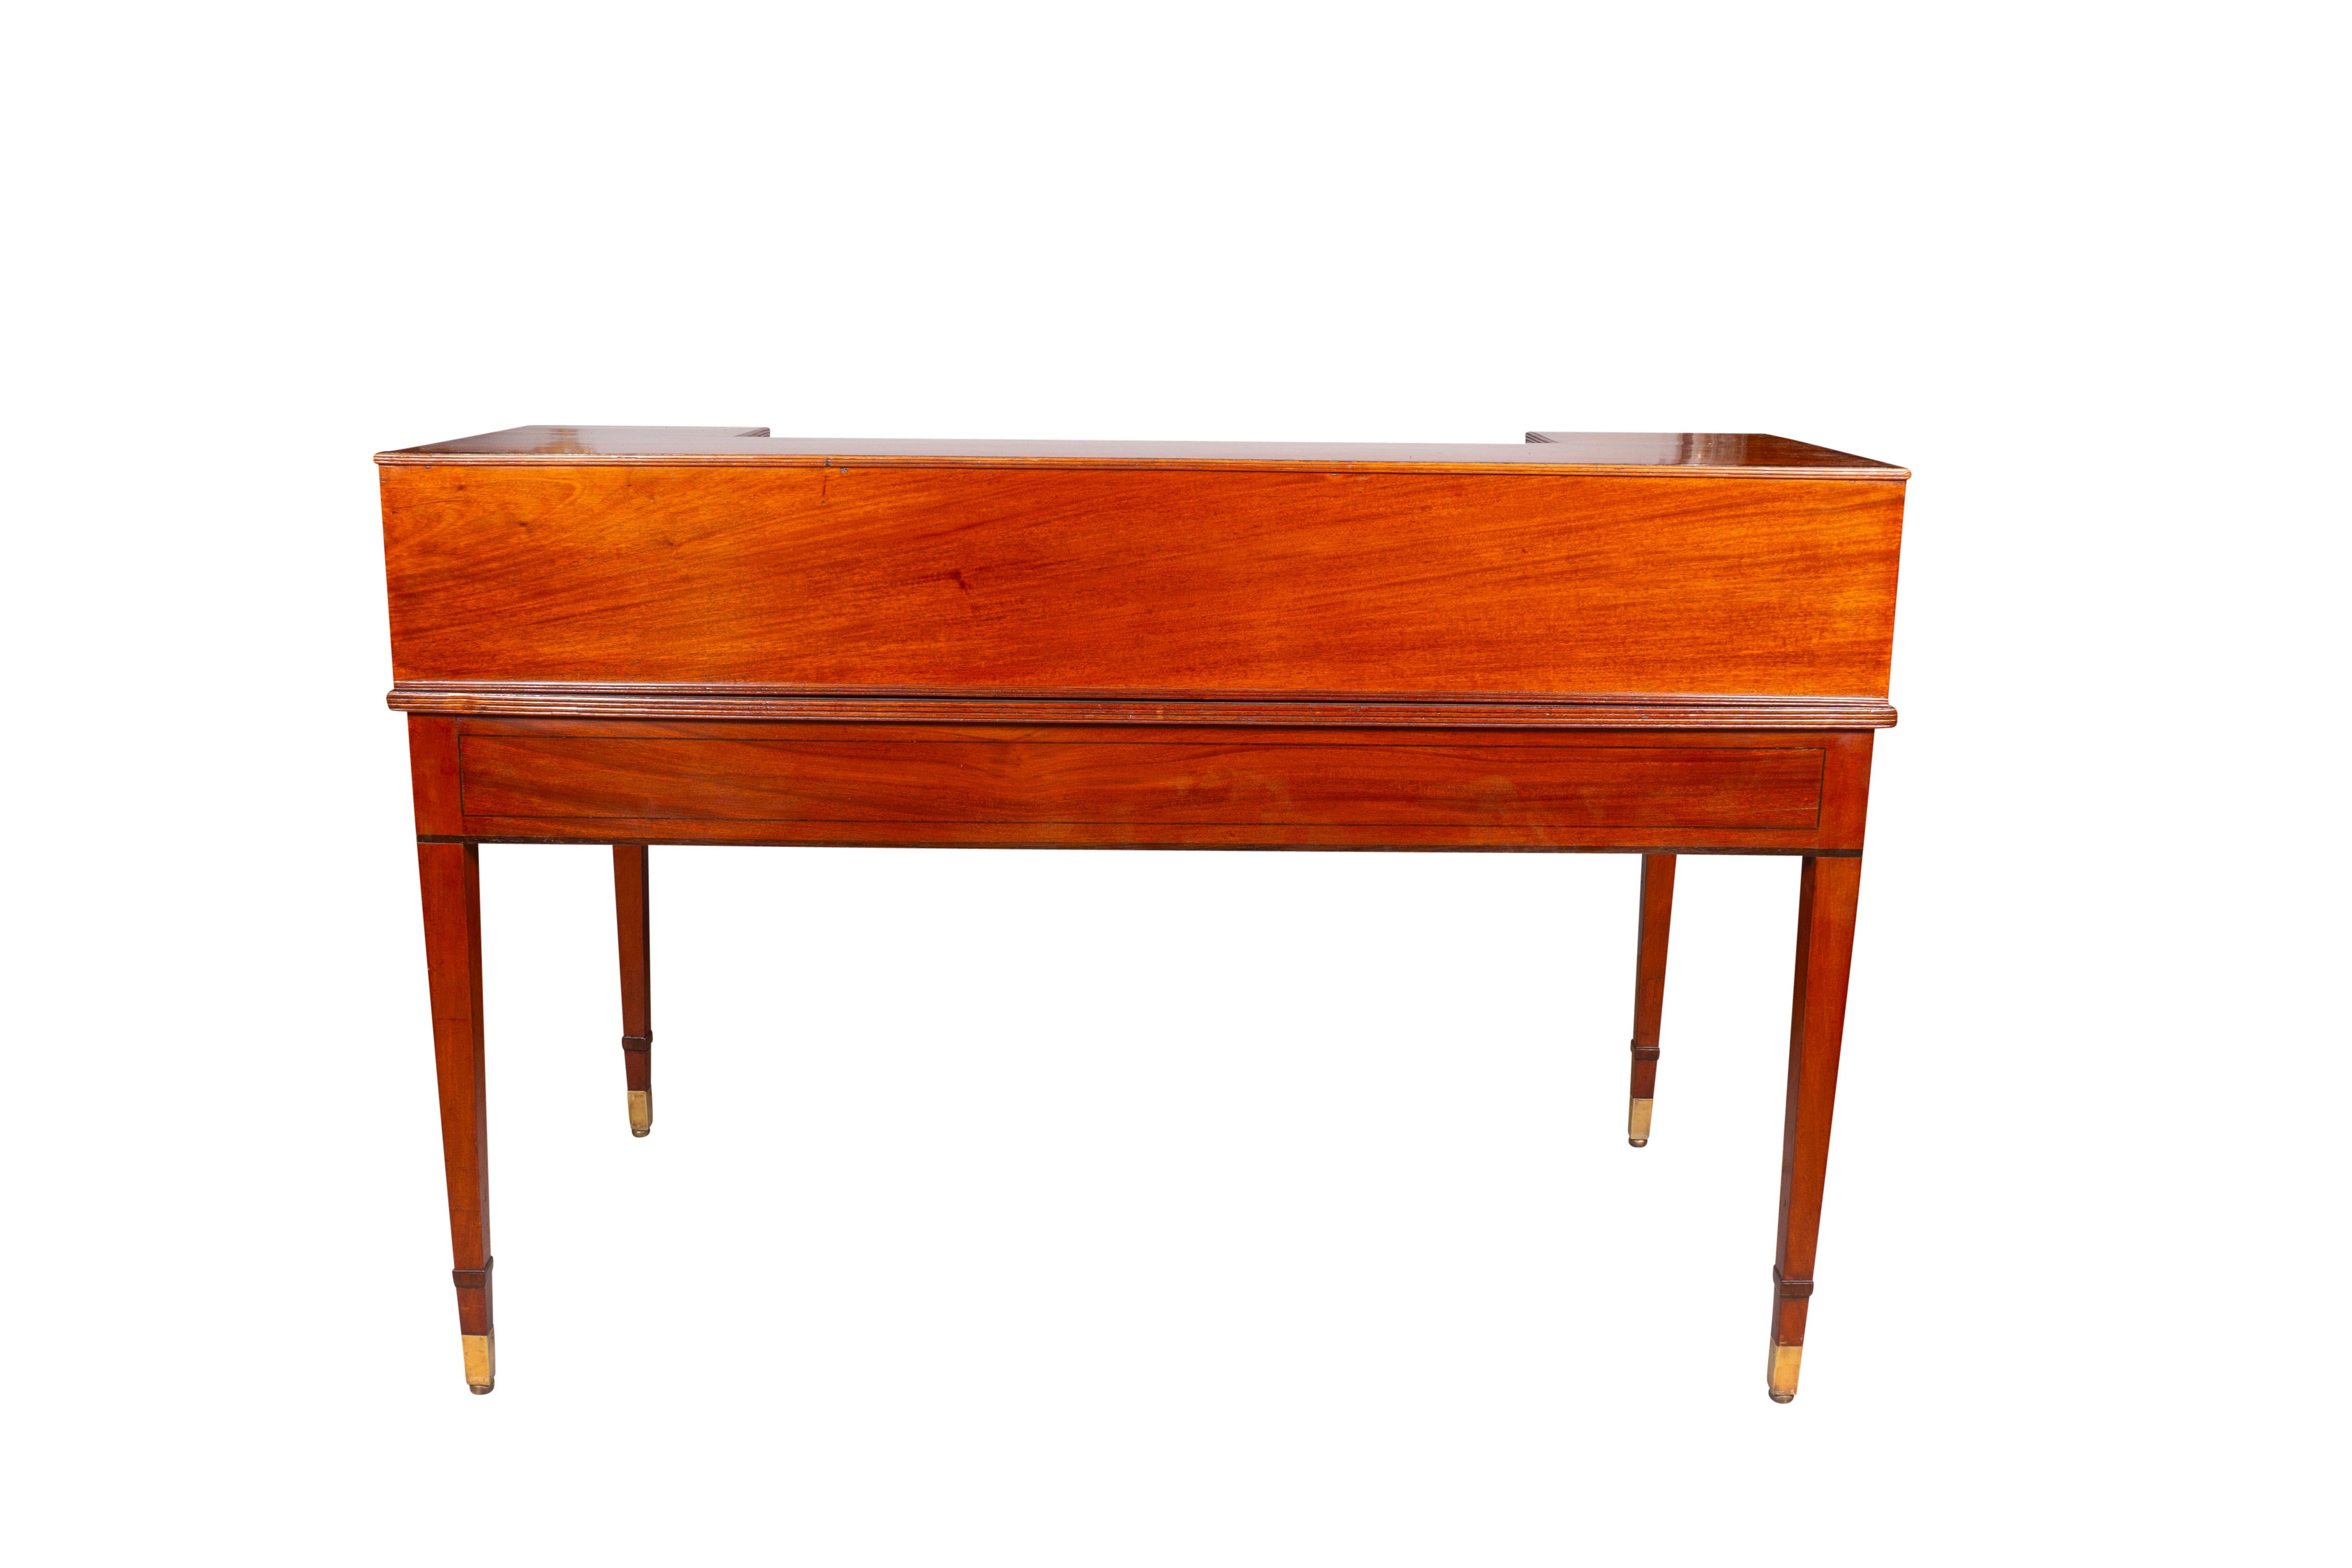 George III Style Mahogany And Brass Inlaid Carleton House Desk For Sale 3